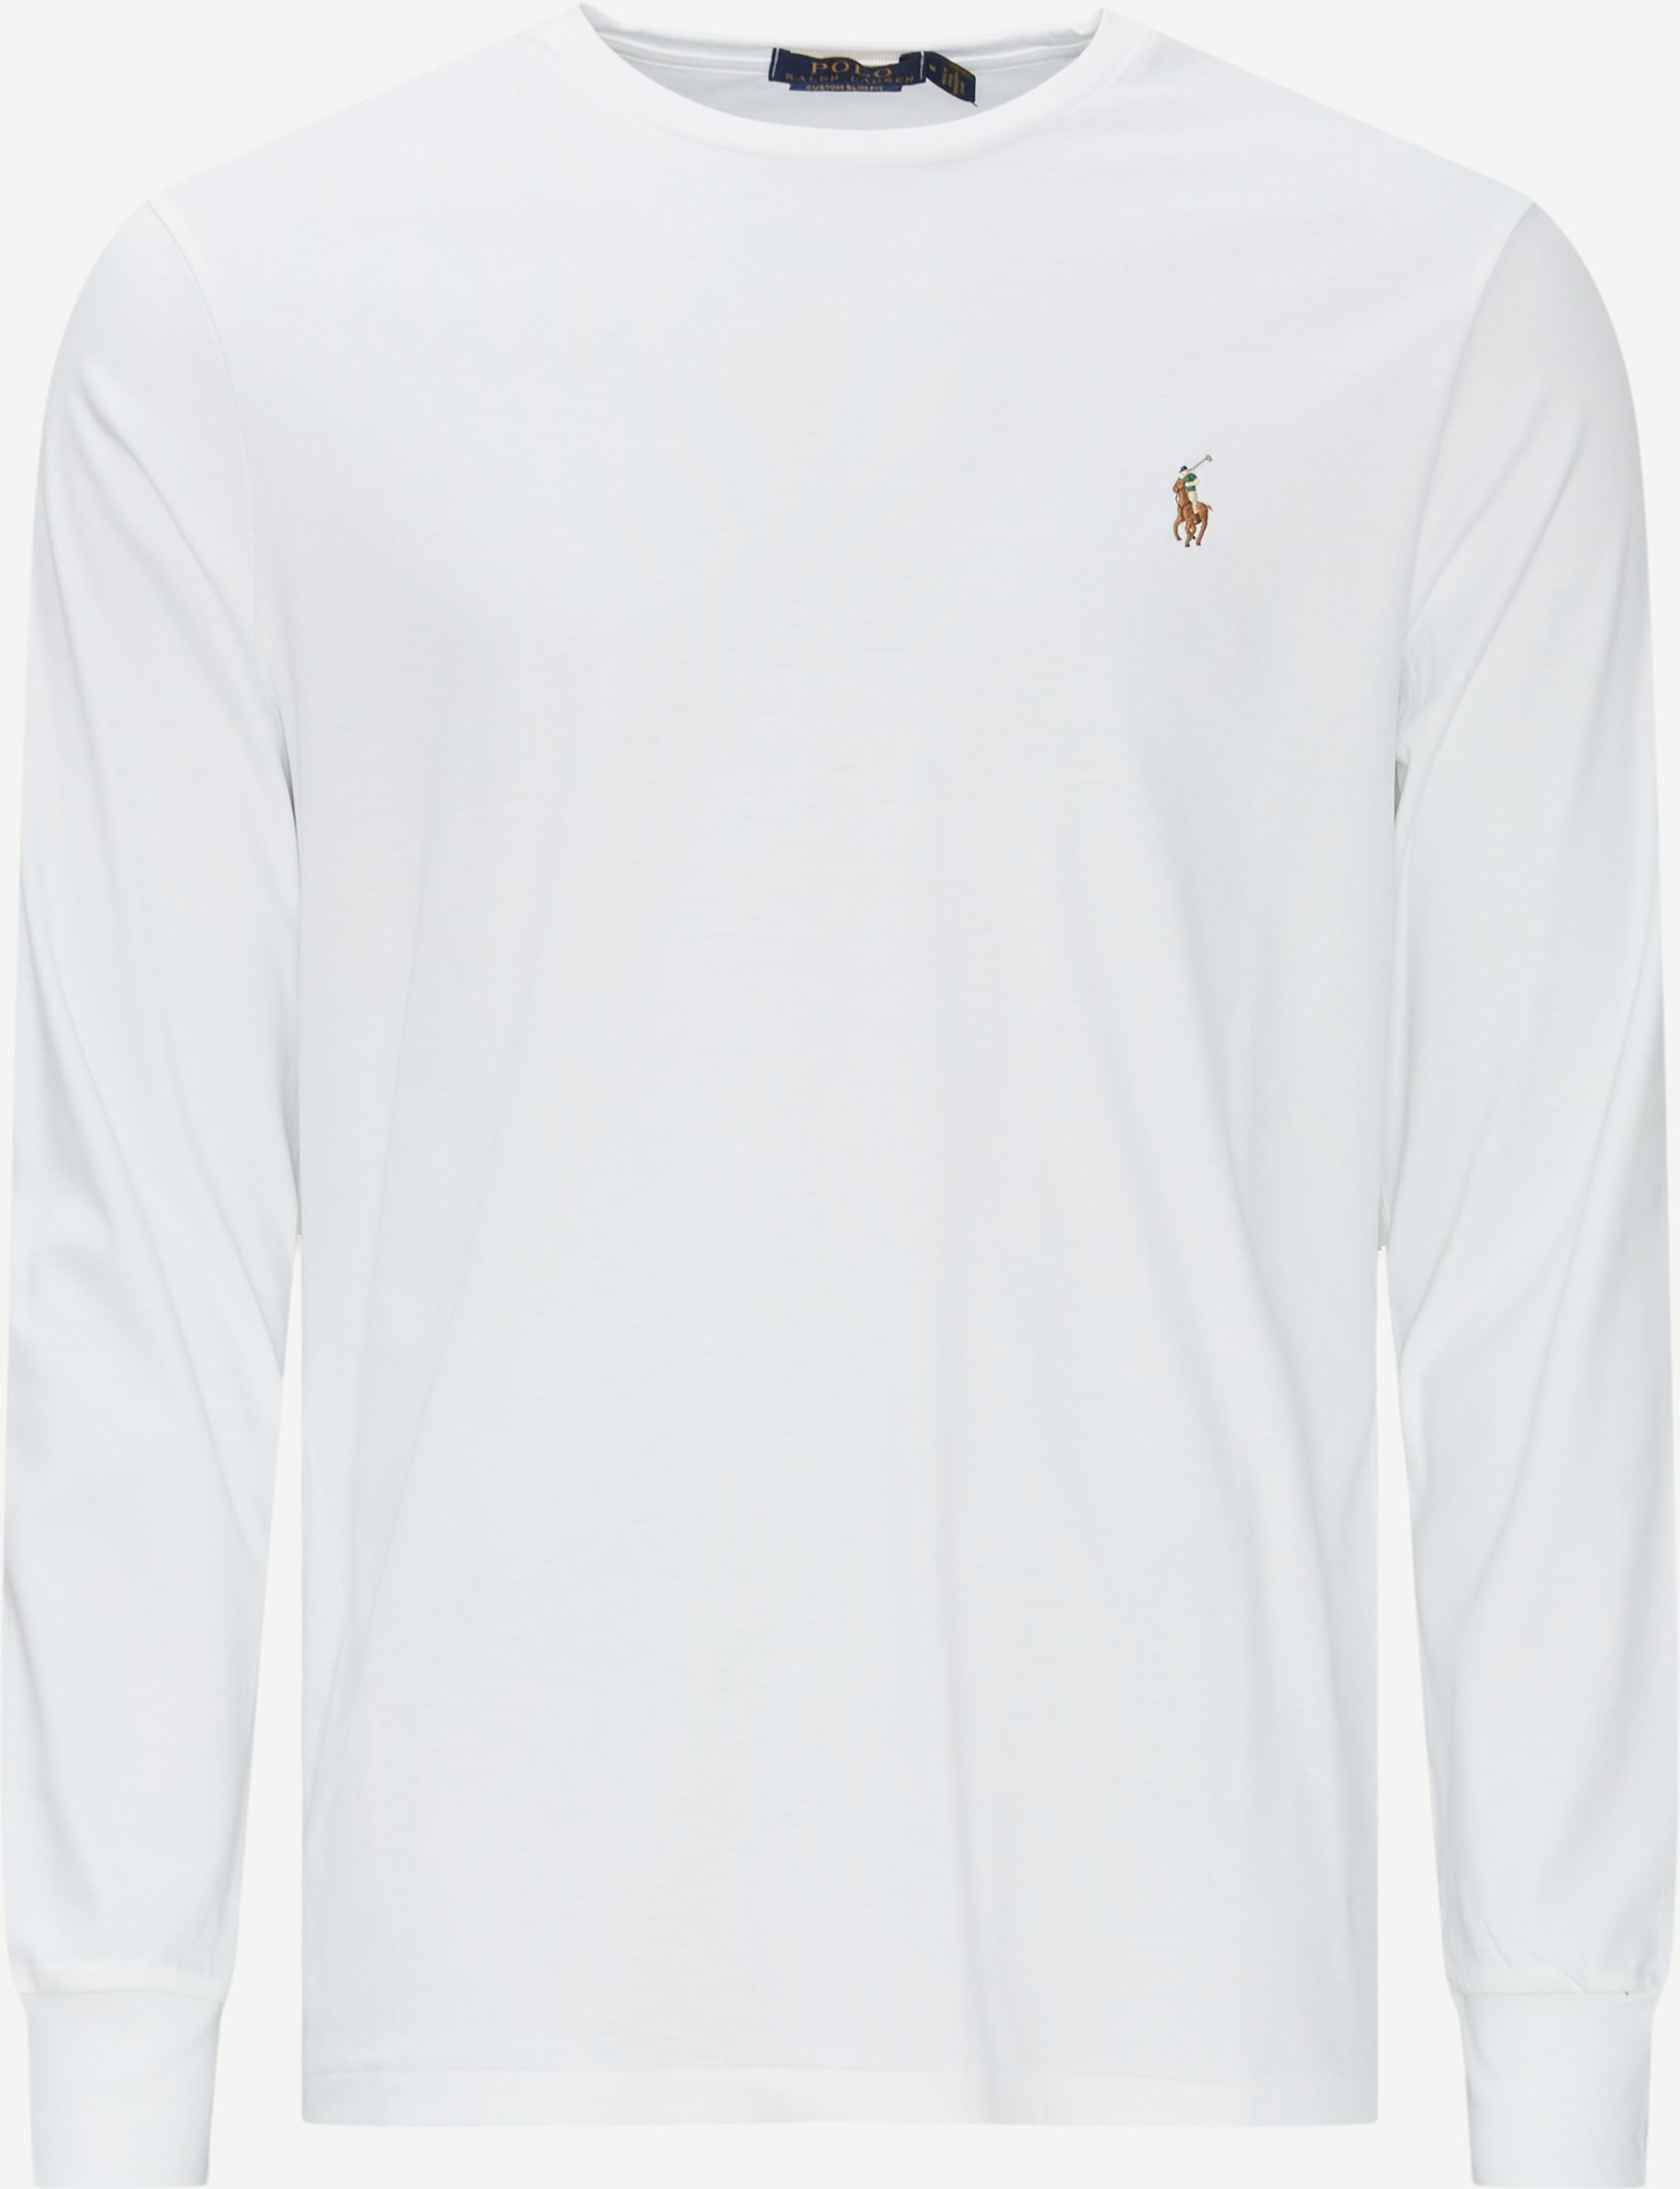 Soft Touch Long Sleeve Tee - T-shirts - Regular slim fit - White